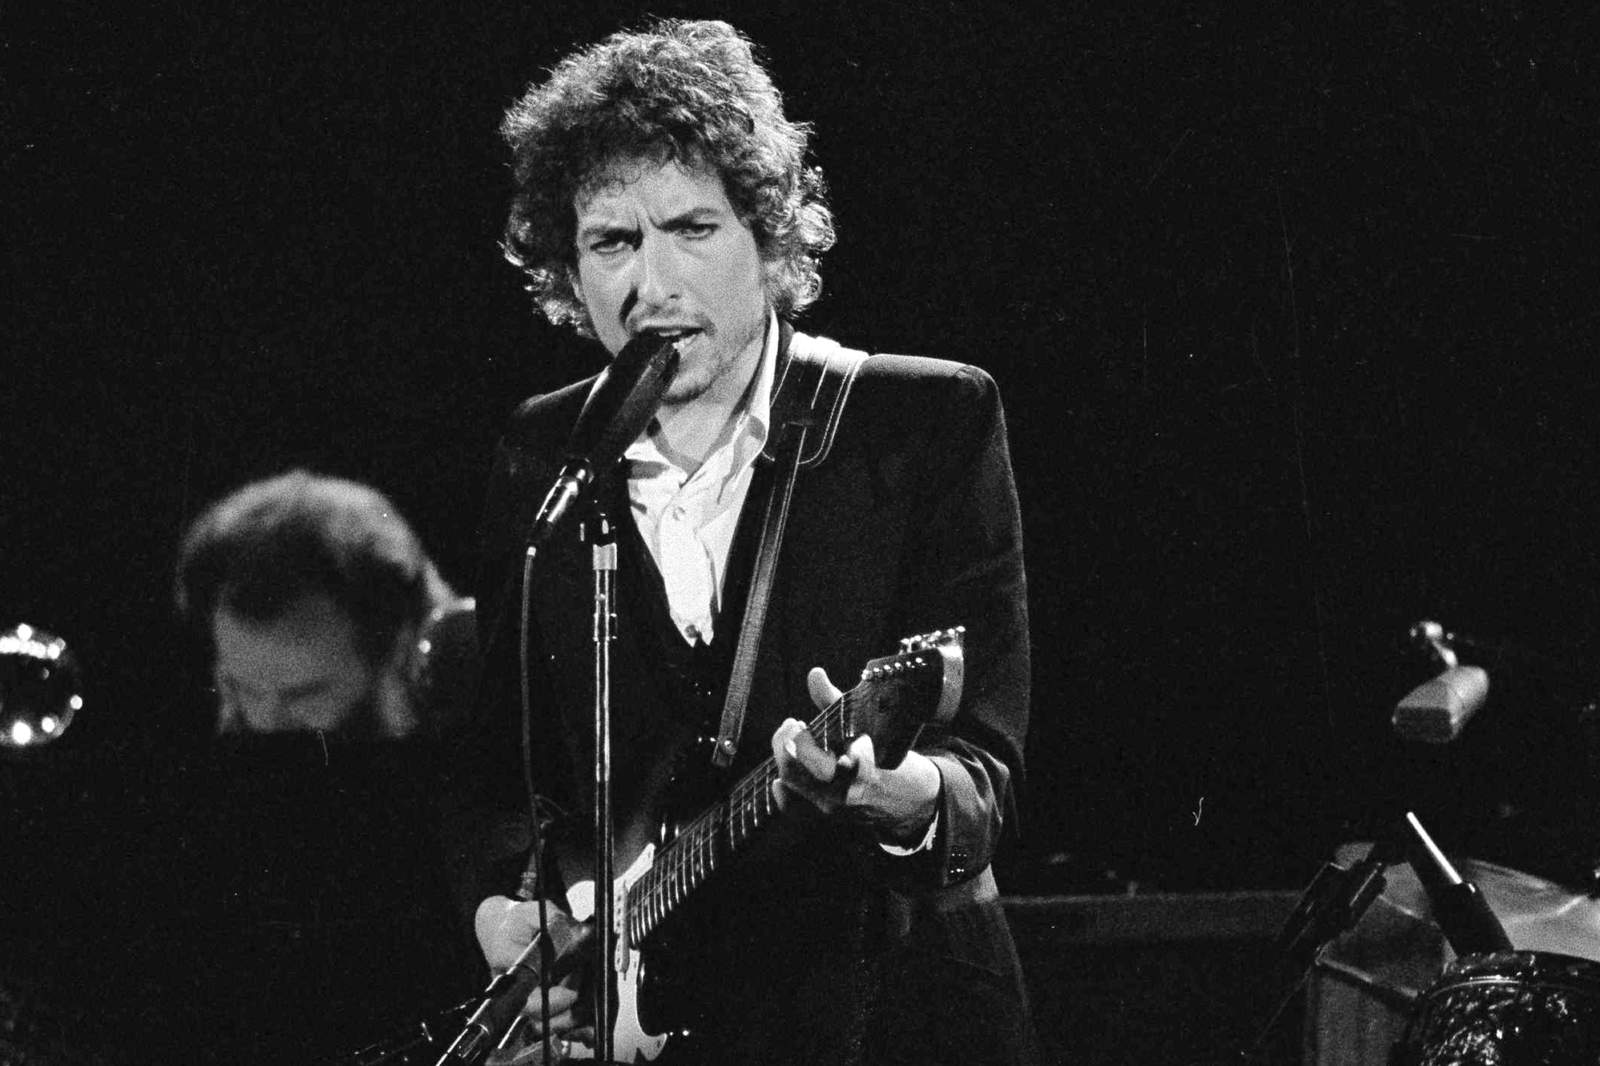 Bob Dylan sells entire catalog of more than 600 songs to Universal